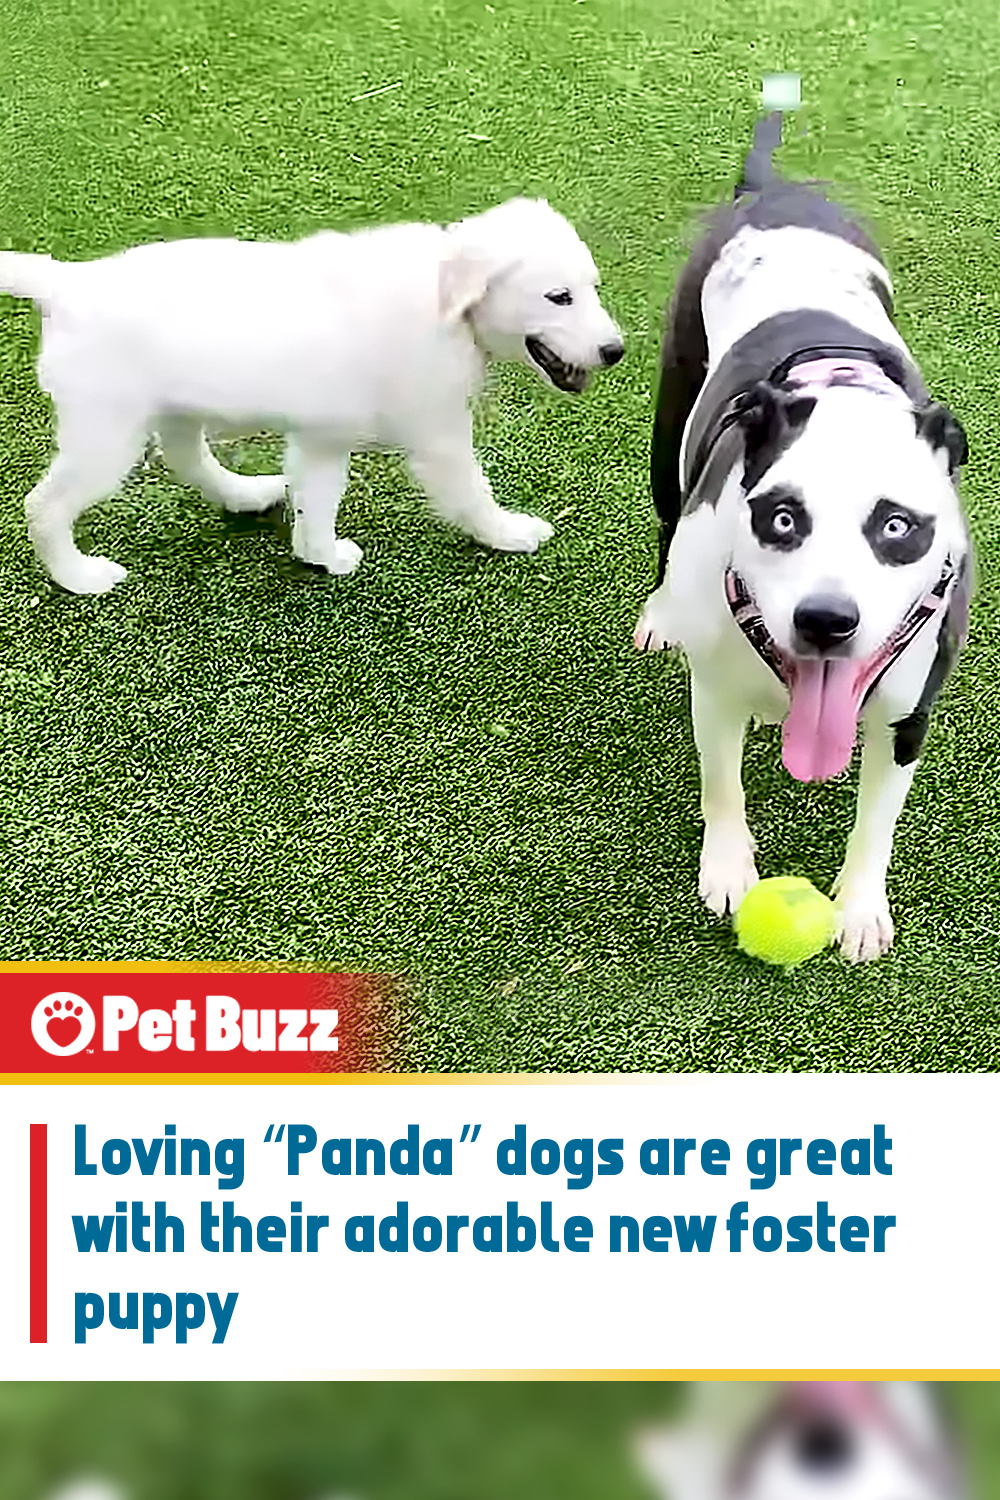 Loving “Panda” dogs are great with their adorable new foster puppy